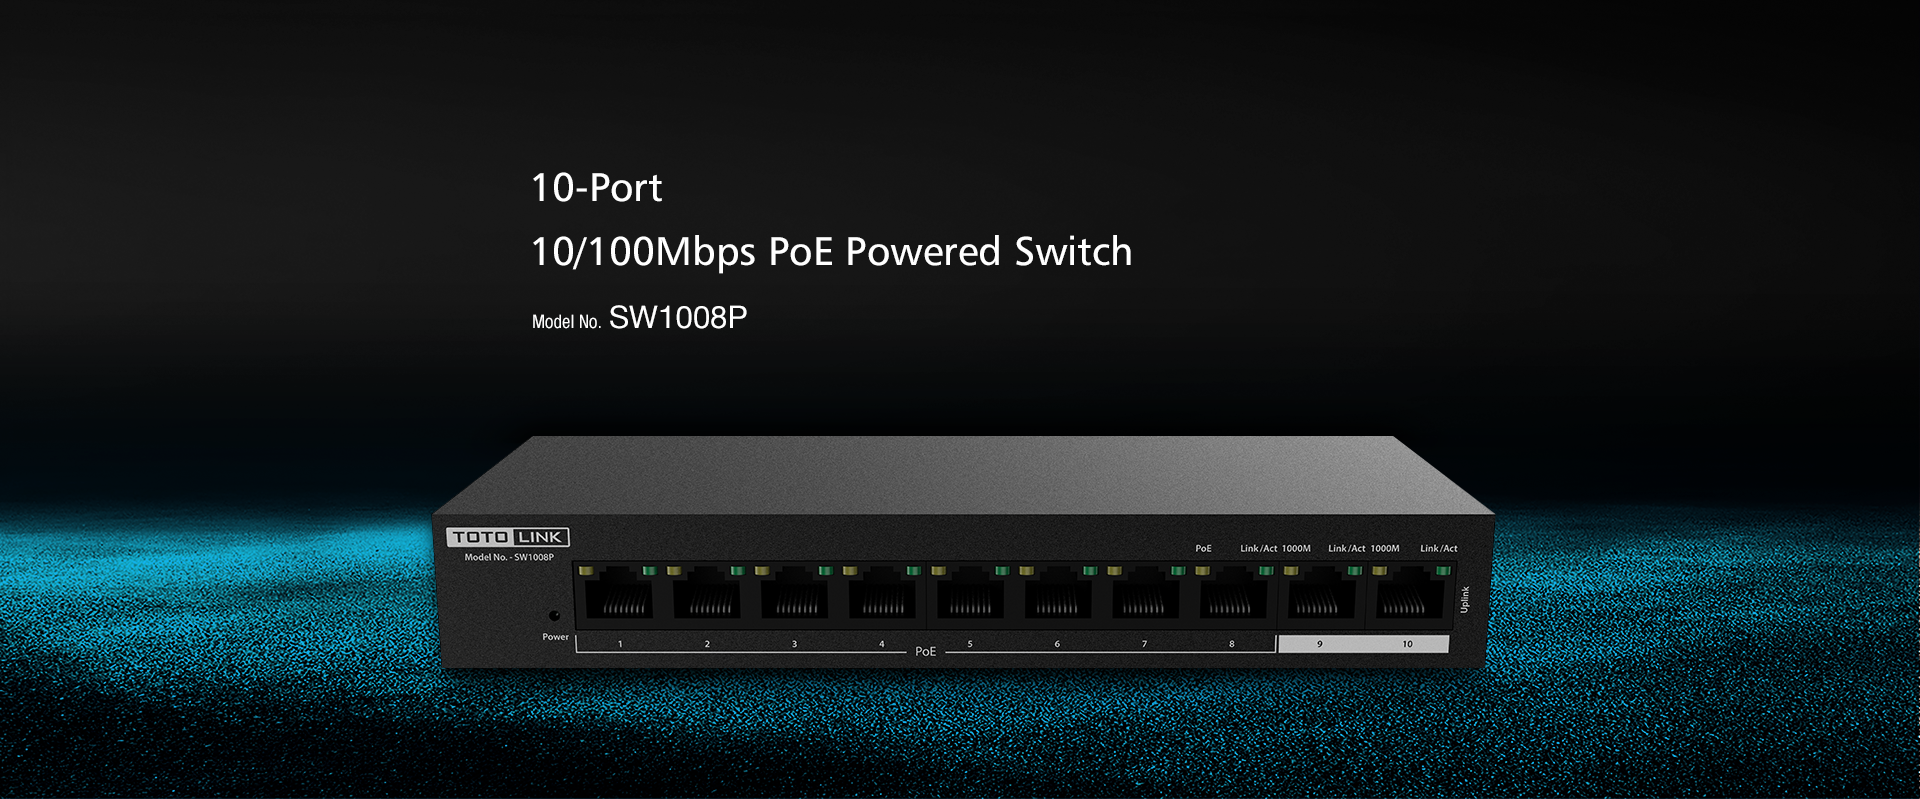 SW1008P-10-Port-10-100Mbps-PoE-Powered-switch